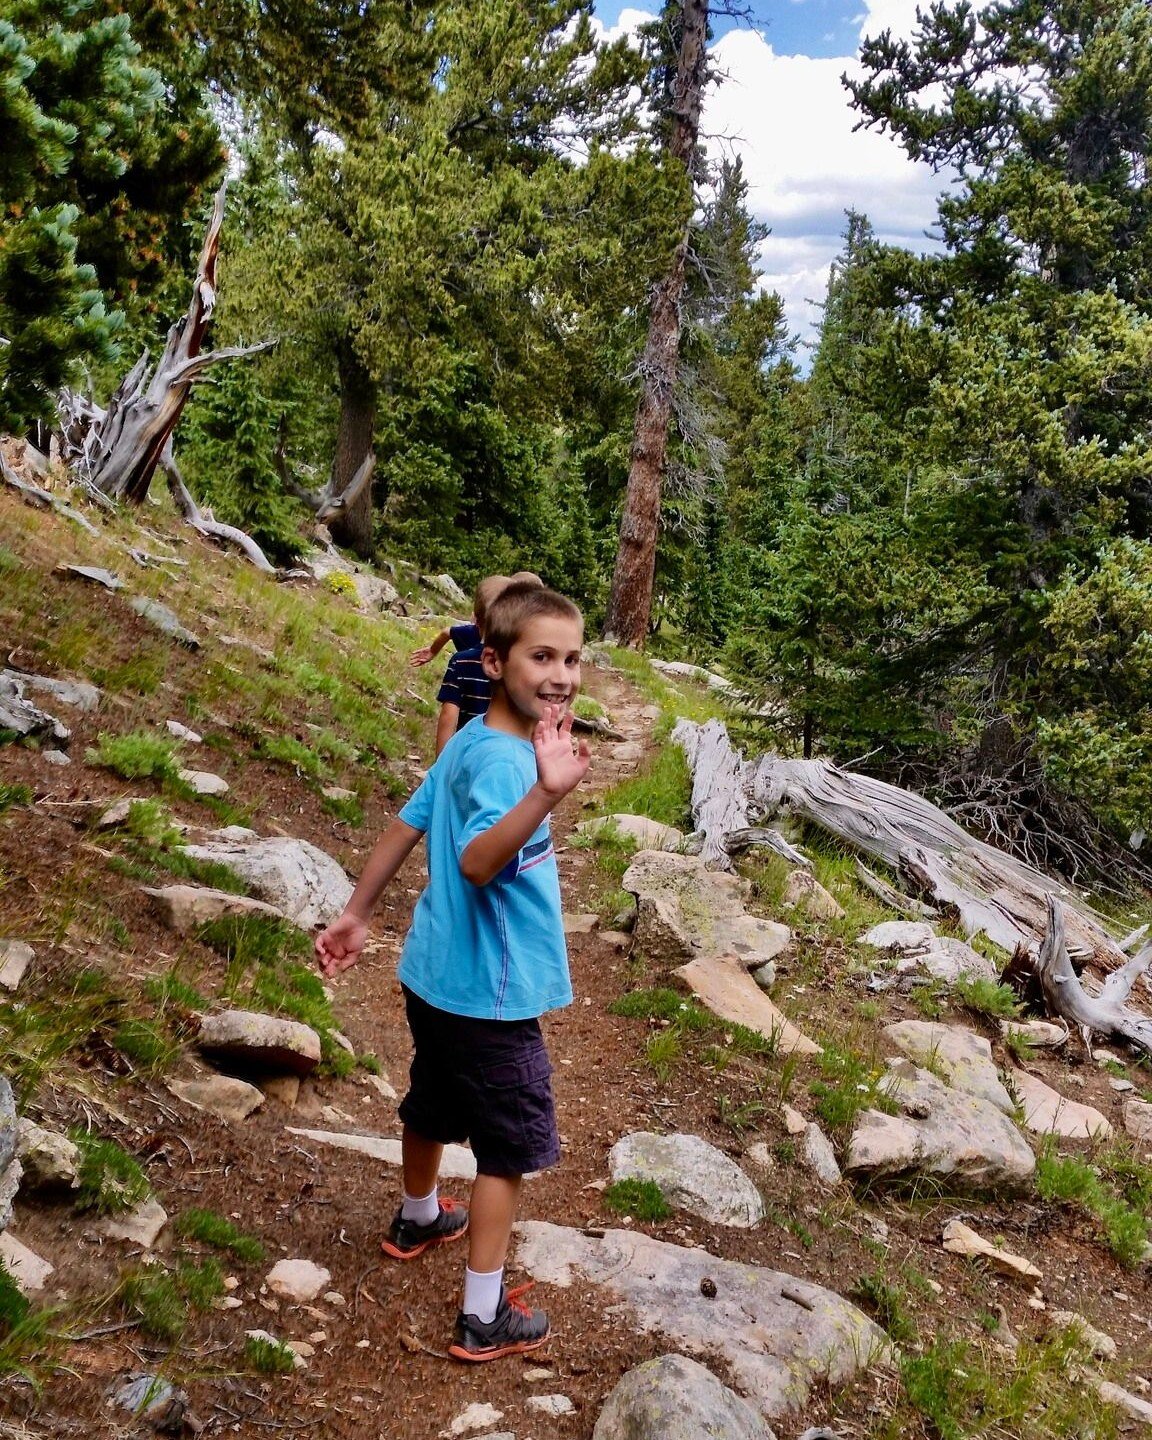 🌈✨ Hiking with children can be a such a fun experience. But let's be real, keeping them happy and engaged on the trail can sometimes be a challenge. 😅 These are some of our tried-and-true tips to make hiking with little ones a joyful and memorable 